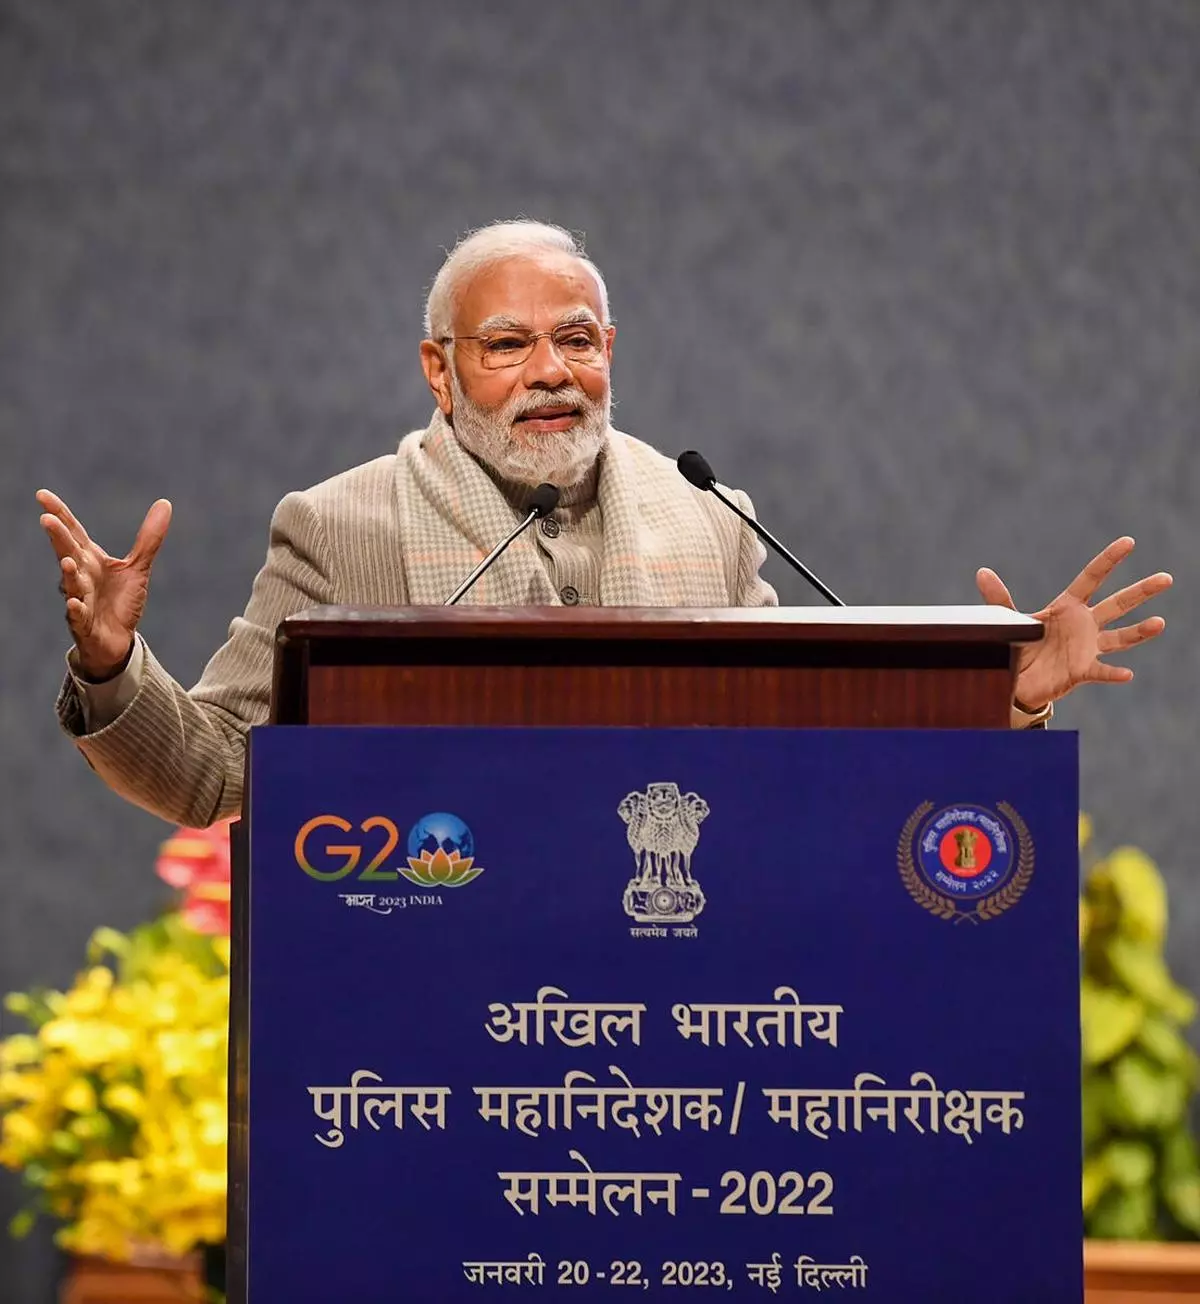 Prime Minister Narendra Modi addresses the 57th All India Conference of Director Generals/Inspector Generals of Police, in New Delhi, Sunday, January 22, 2023. (PTI Photo)